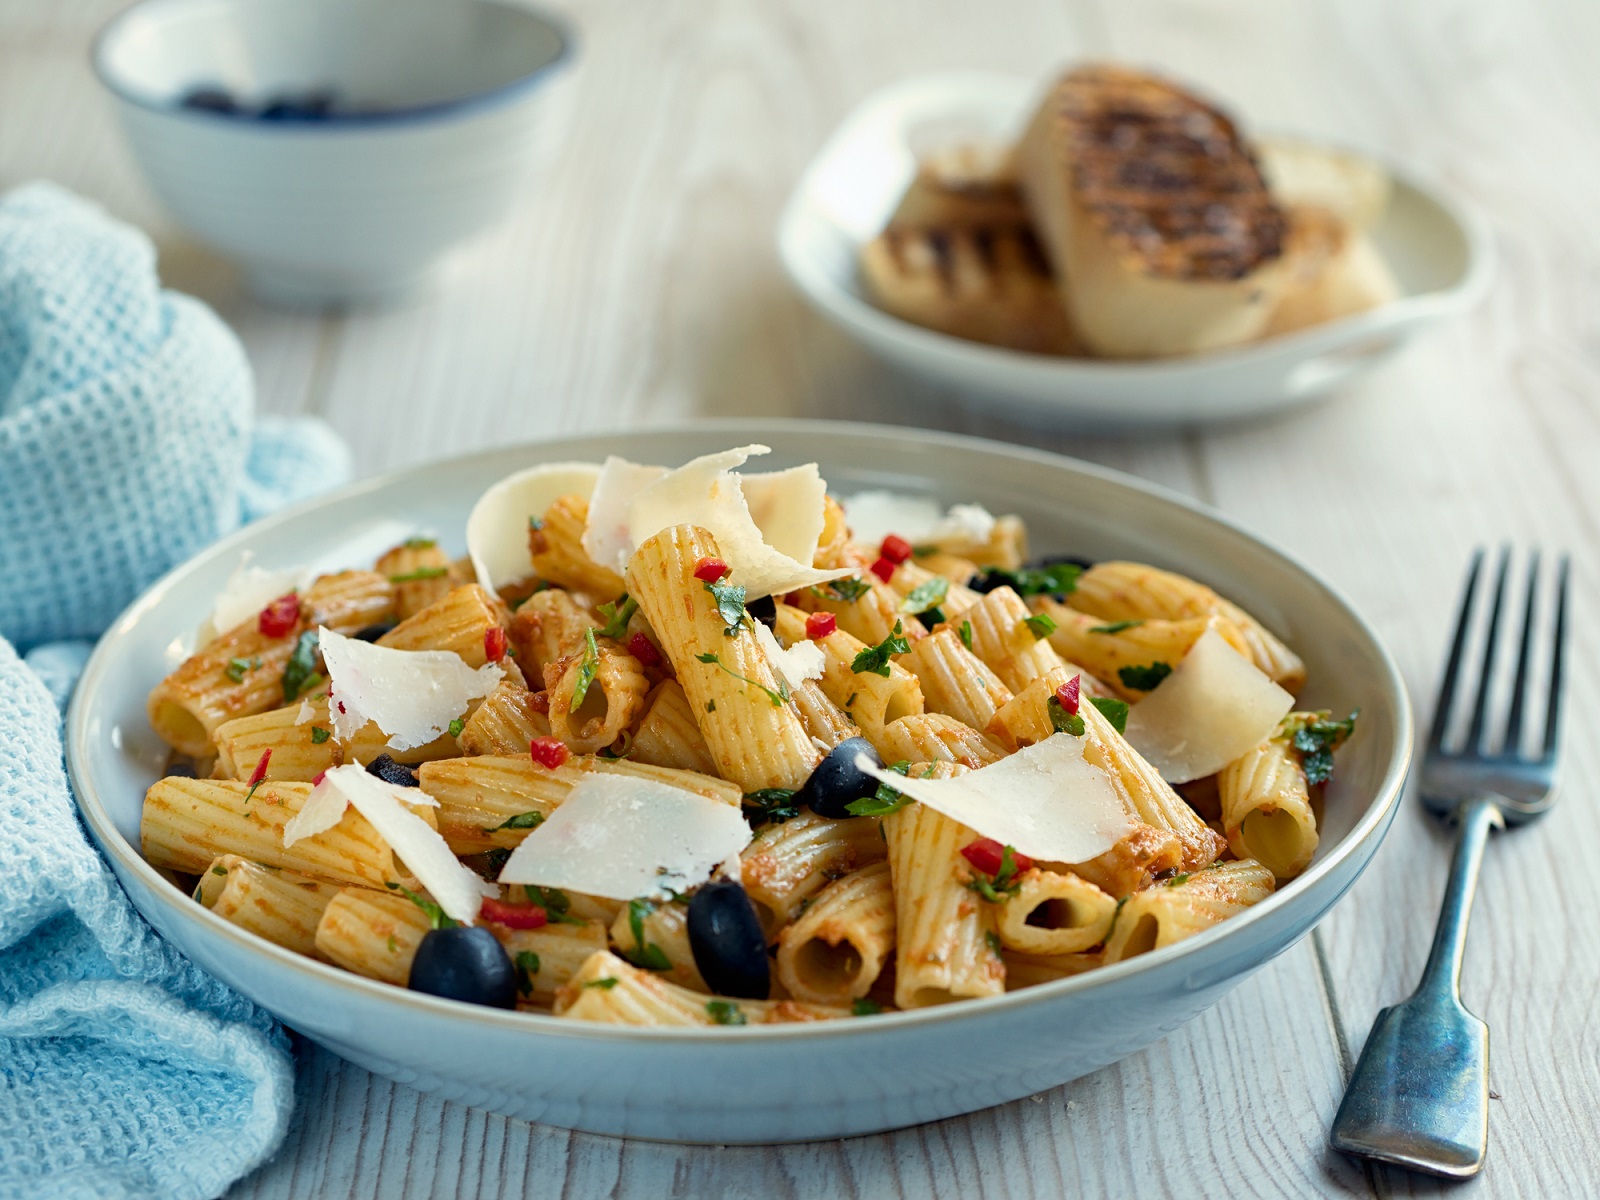 Home made freshness rigatoni pasta salad with red pesto chilli sauce and black olives,service with shaved parmesan cheese and  toasted ciabatta bread